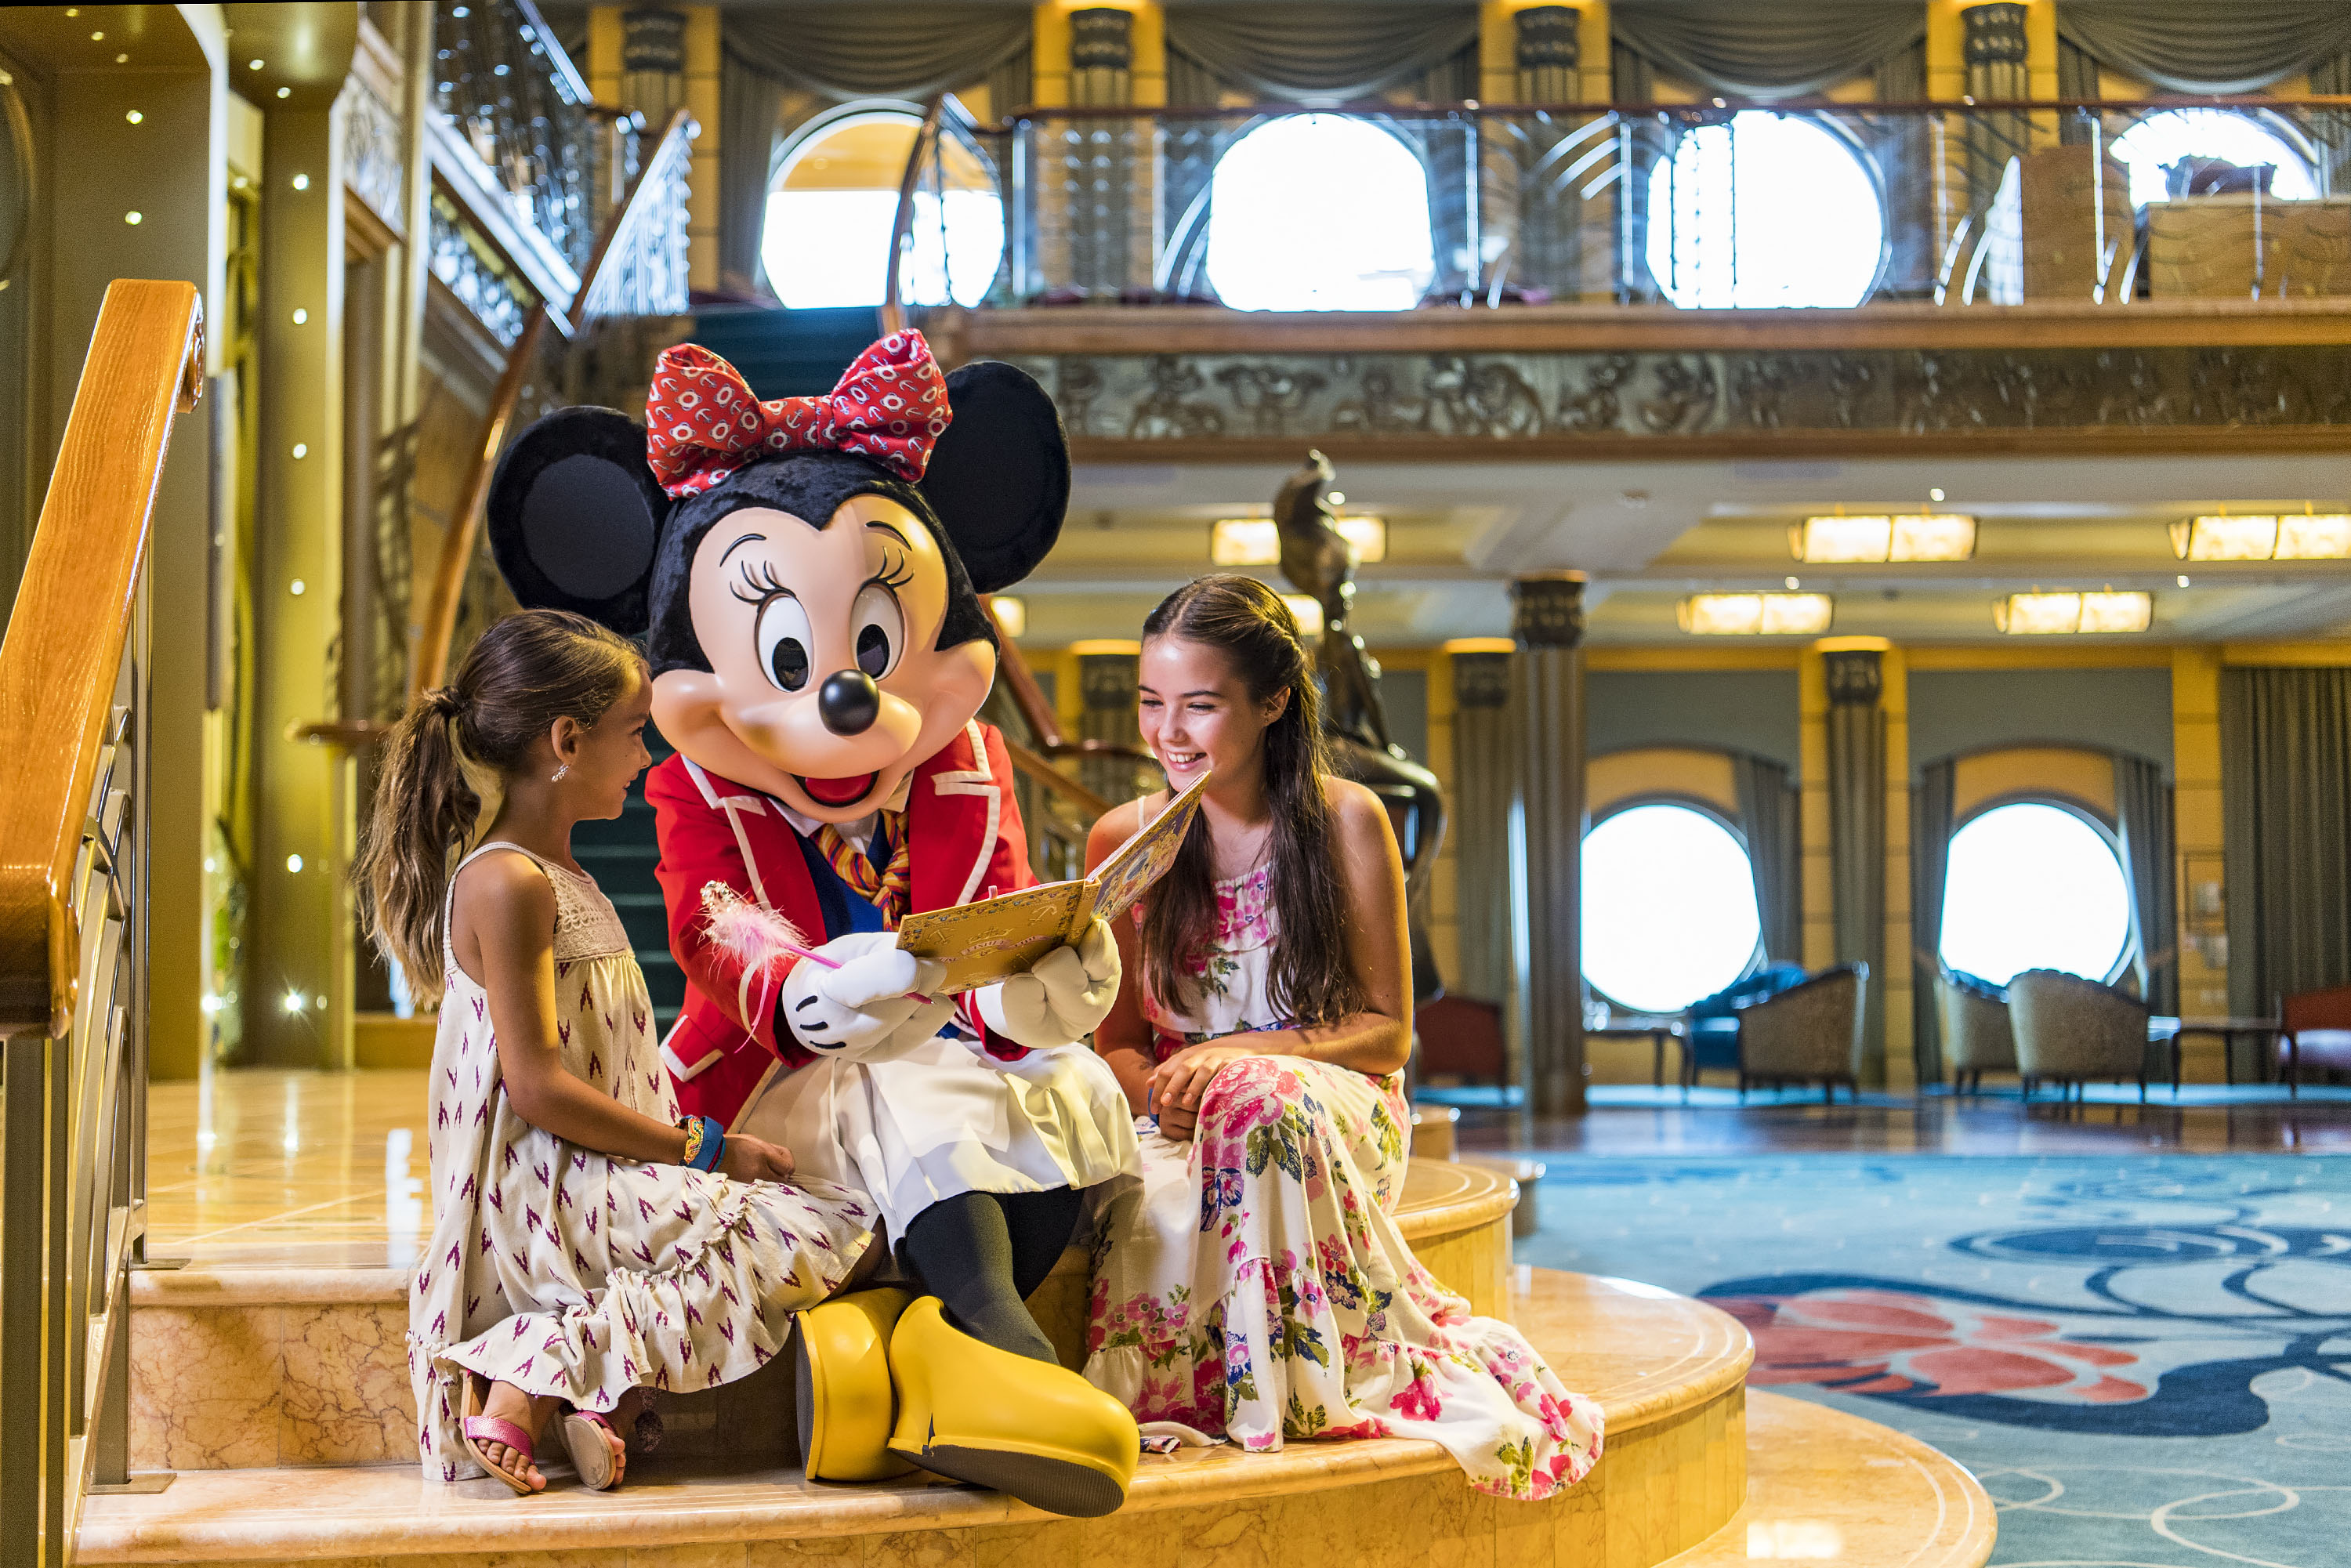  Is a Disney Cruise worth the extra money?